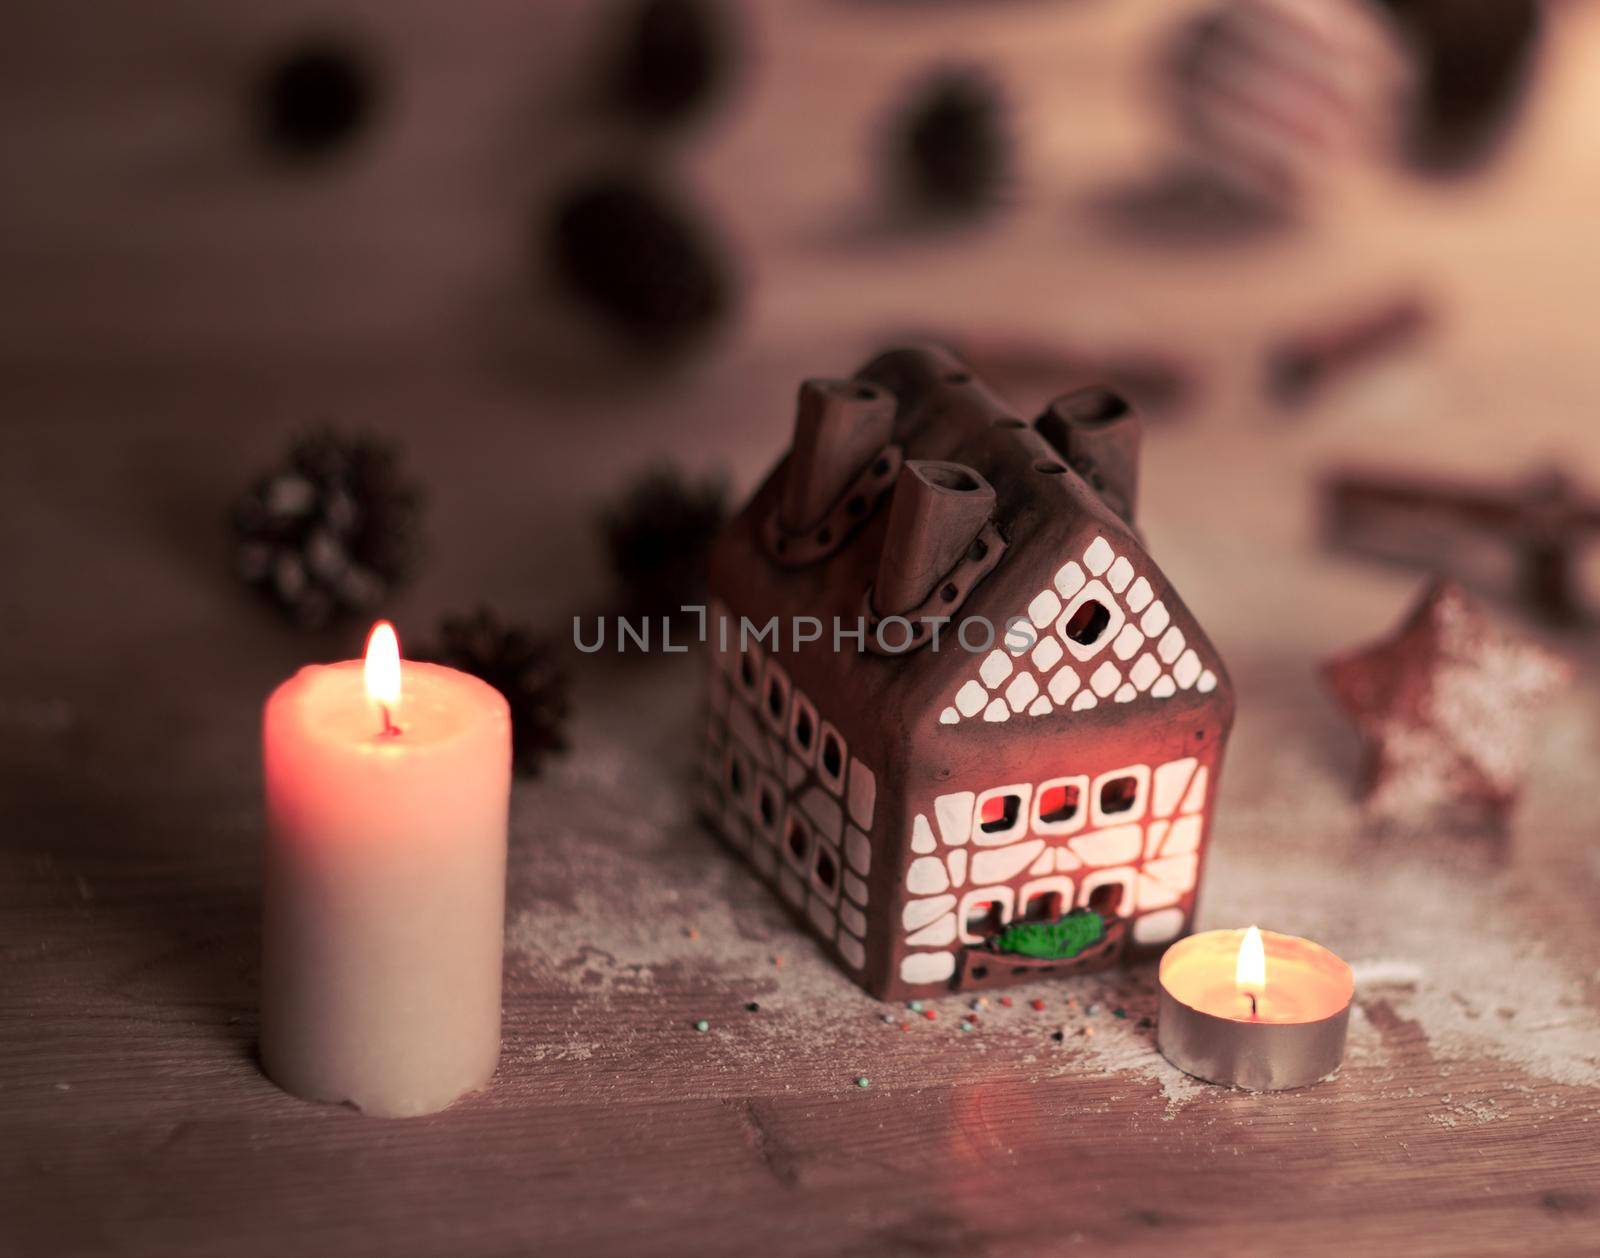 fairy Christmas house cake with candle light inside and nice background lights by SmartPhotoLab